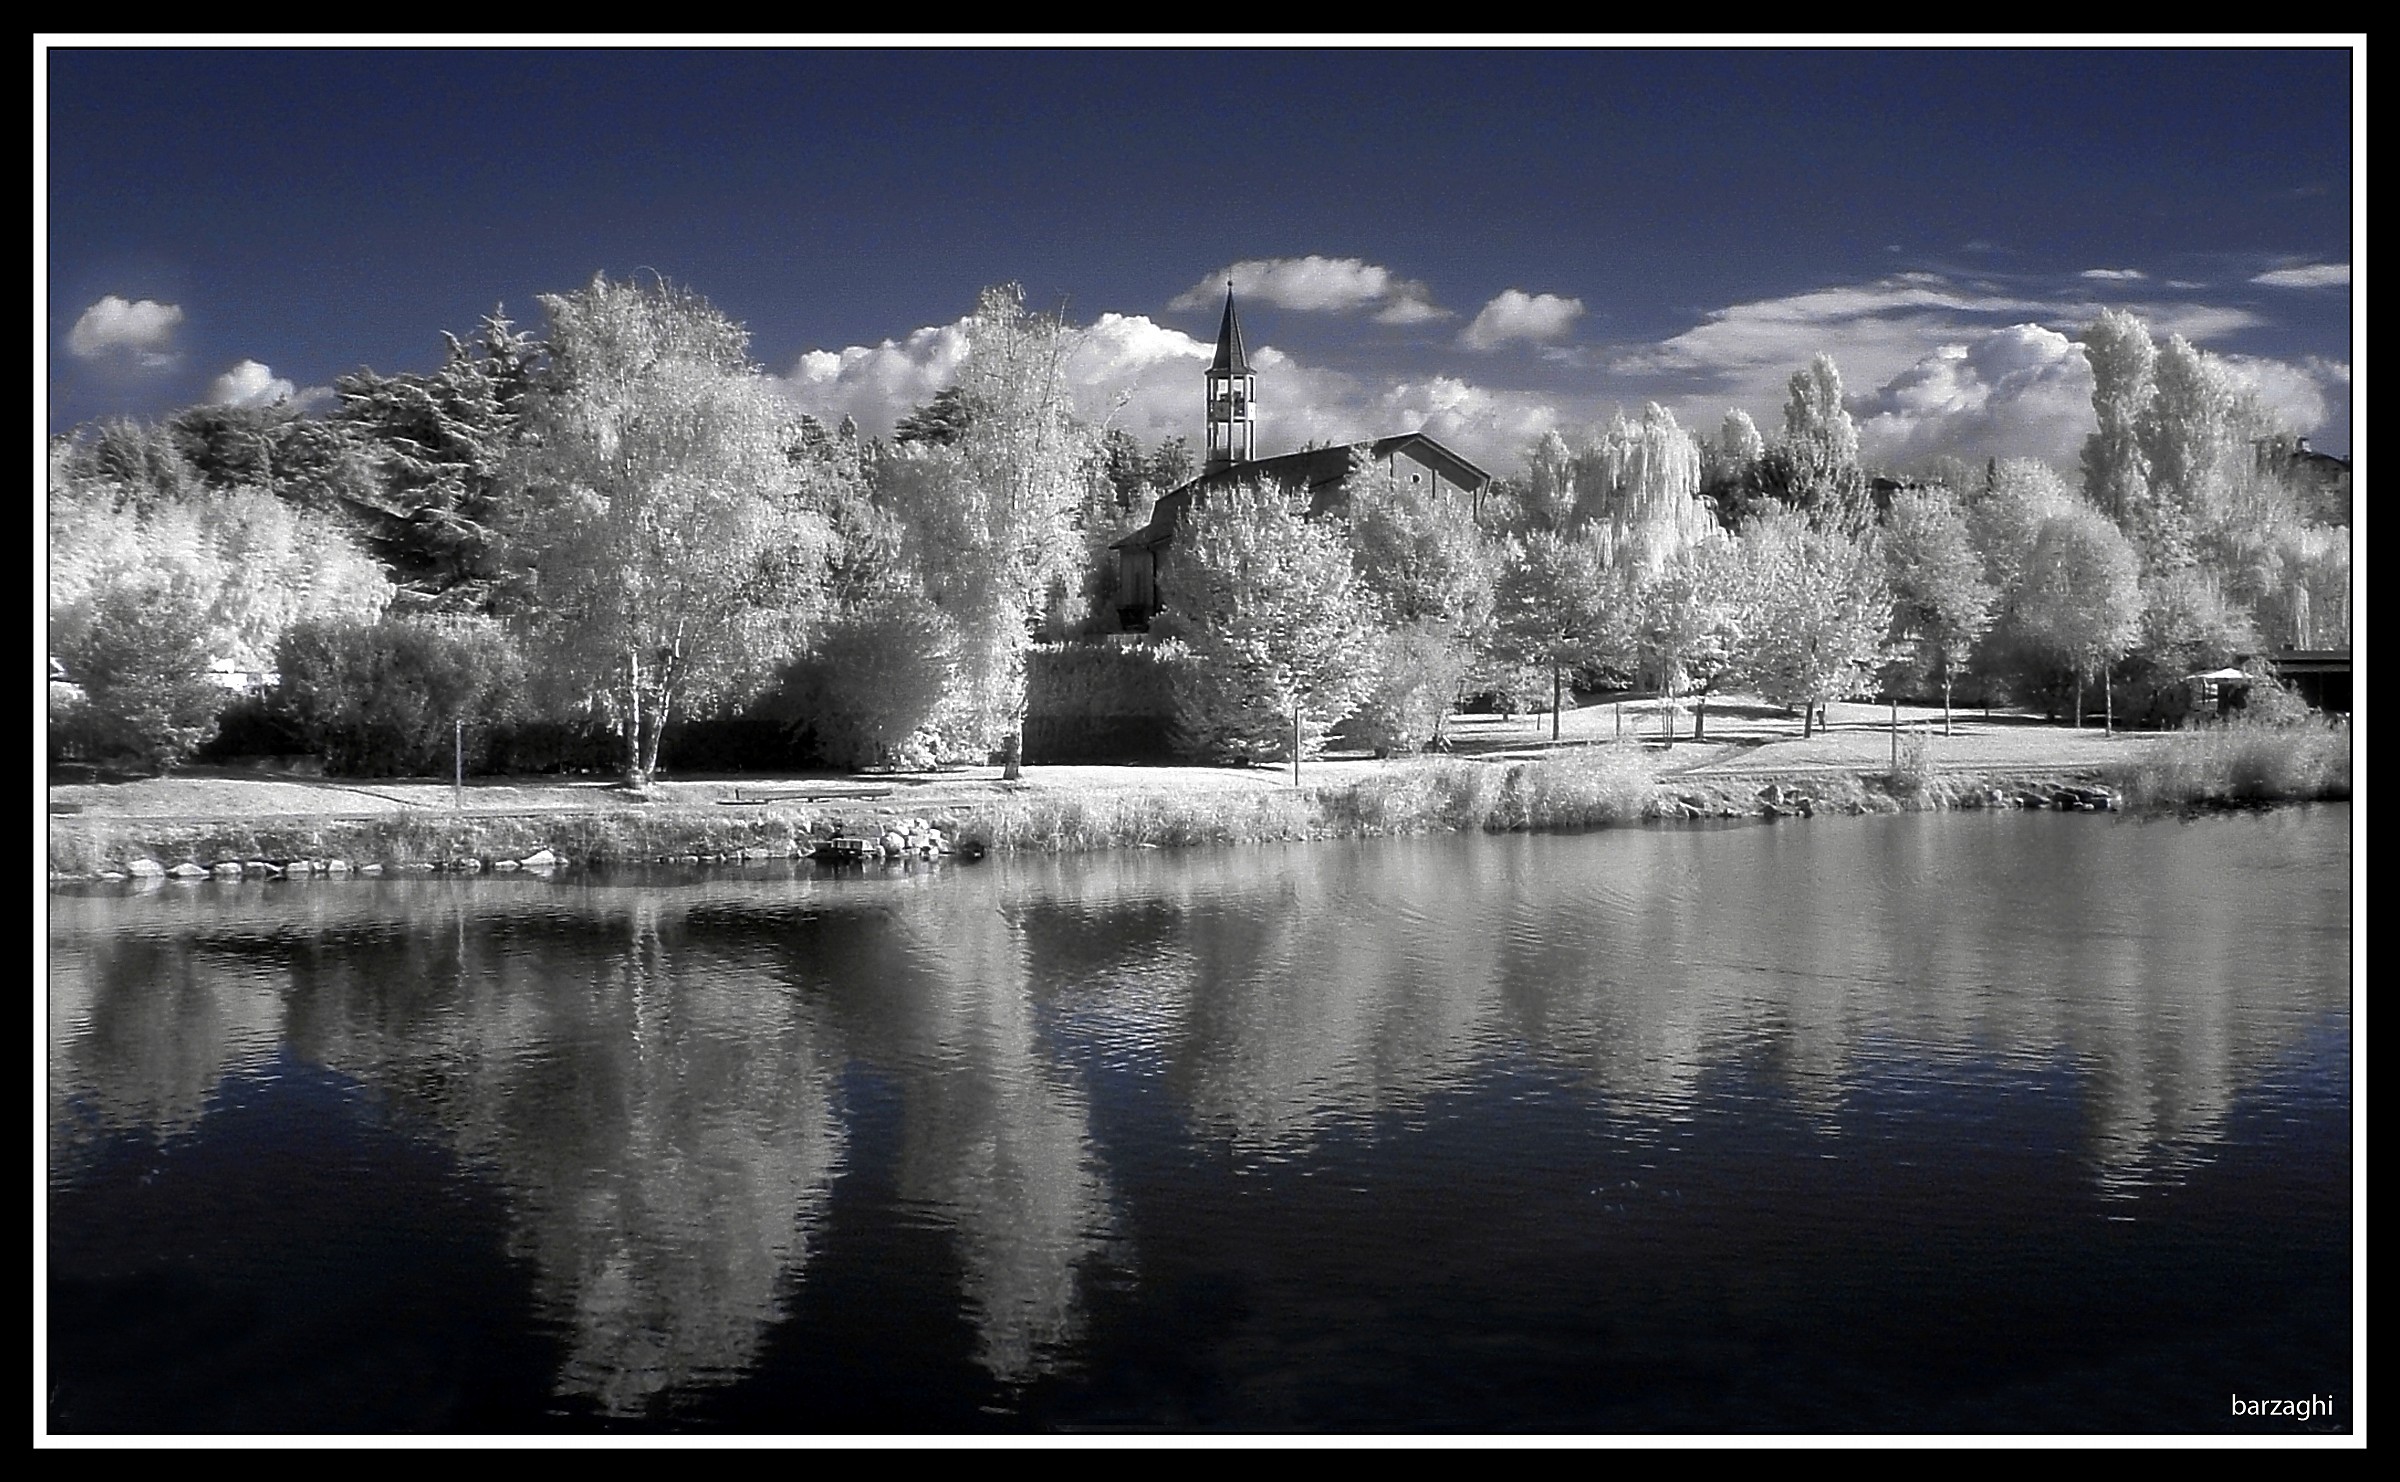 the pond in infrared...